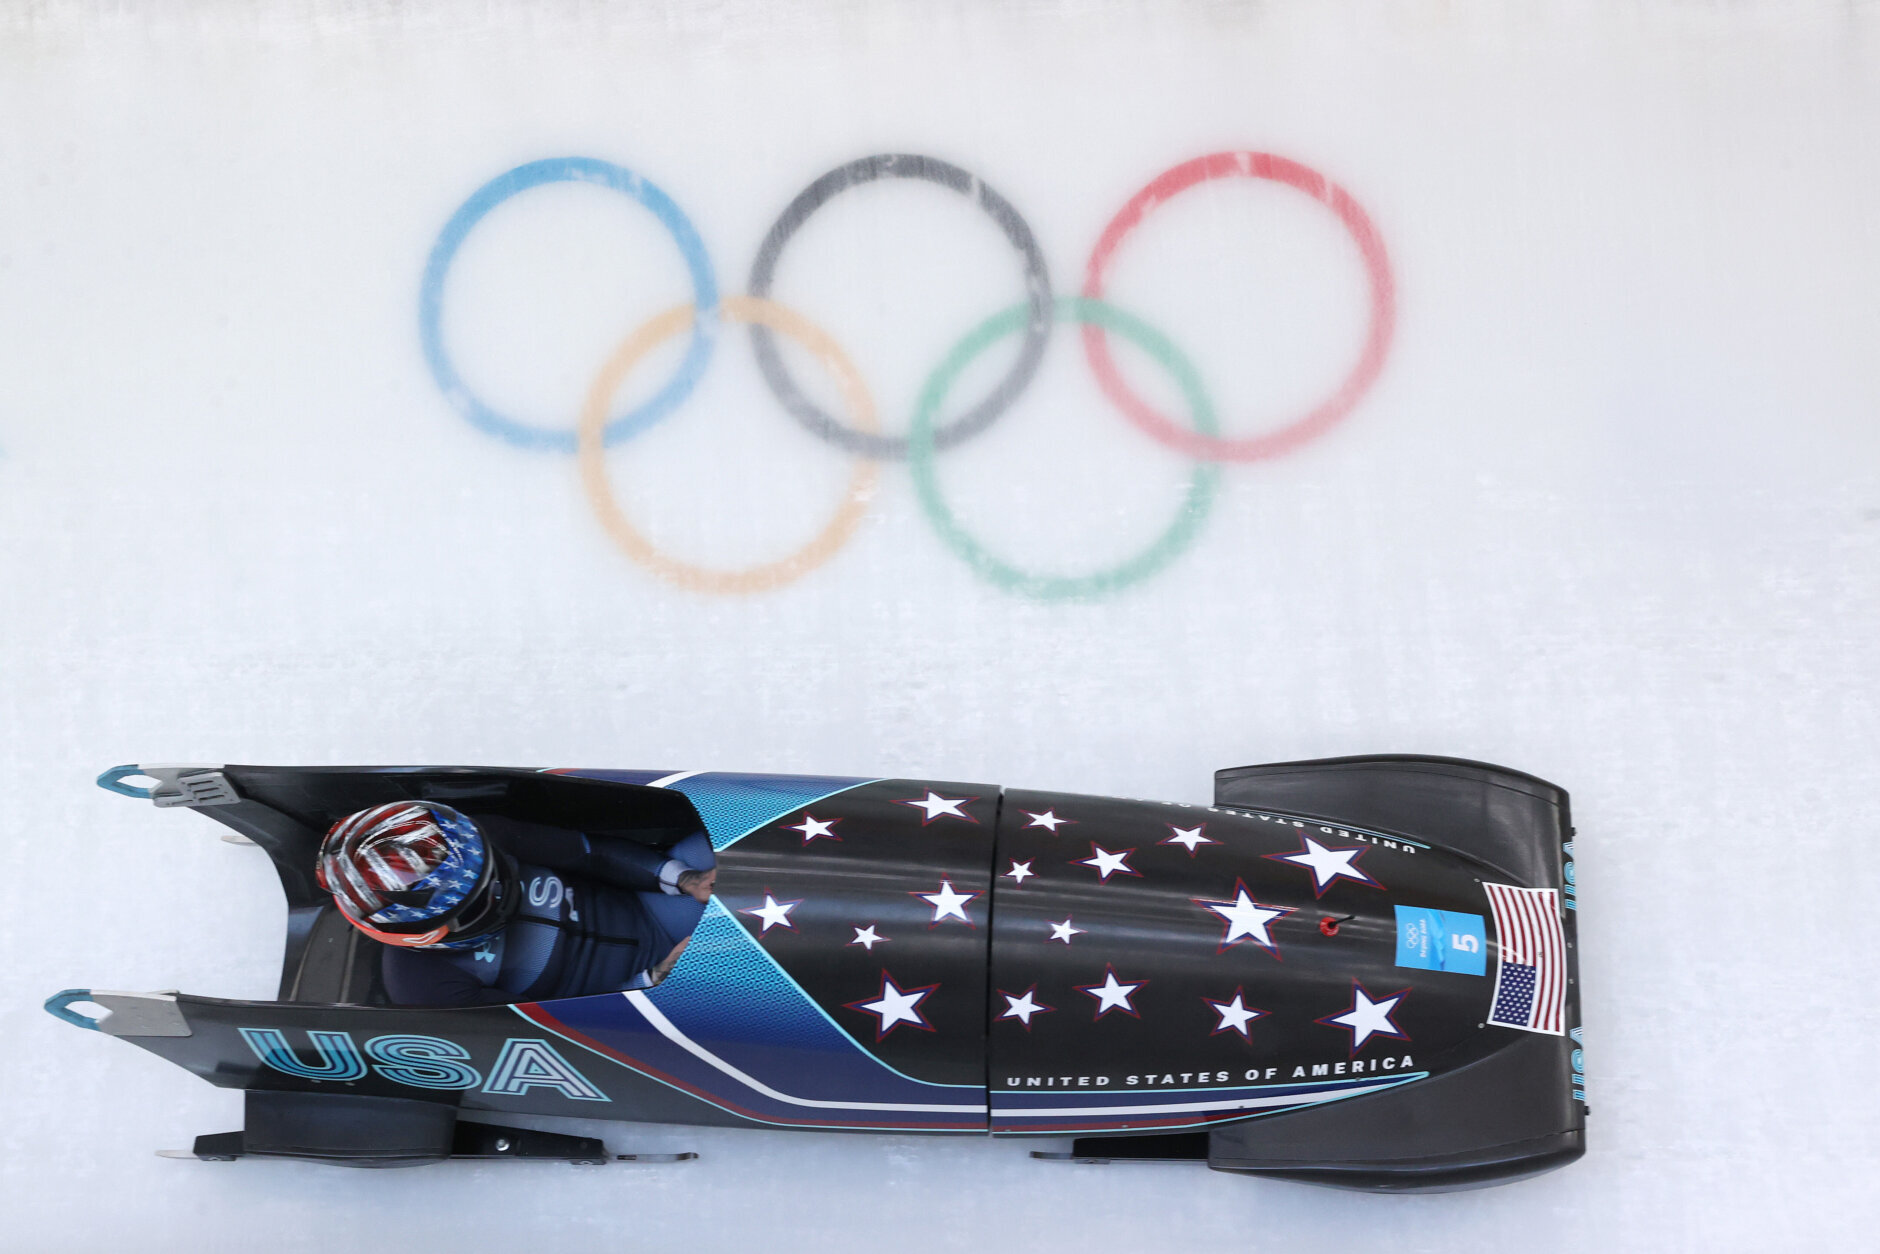 YANQING, CHINA - FEBRUARY 14:  Kaillie Humphries of Team United States slides during the Women's Monobob Bobsleigh Heat 4 on day 10 of Beijing 2022 Winter Olympic Games at National Sliding Centre on February 14, 2022 in Yanqing, China. (Photo by Alex Pantling/Getty Images)